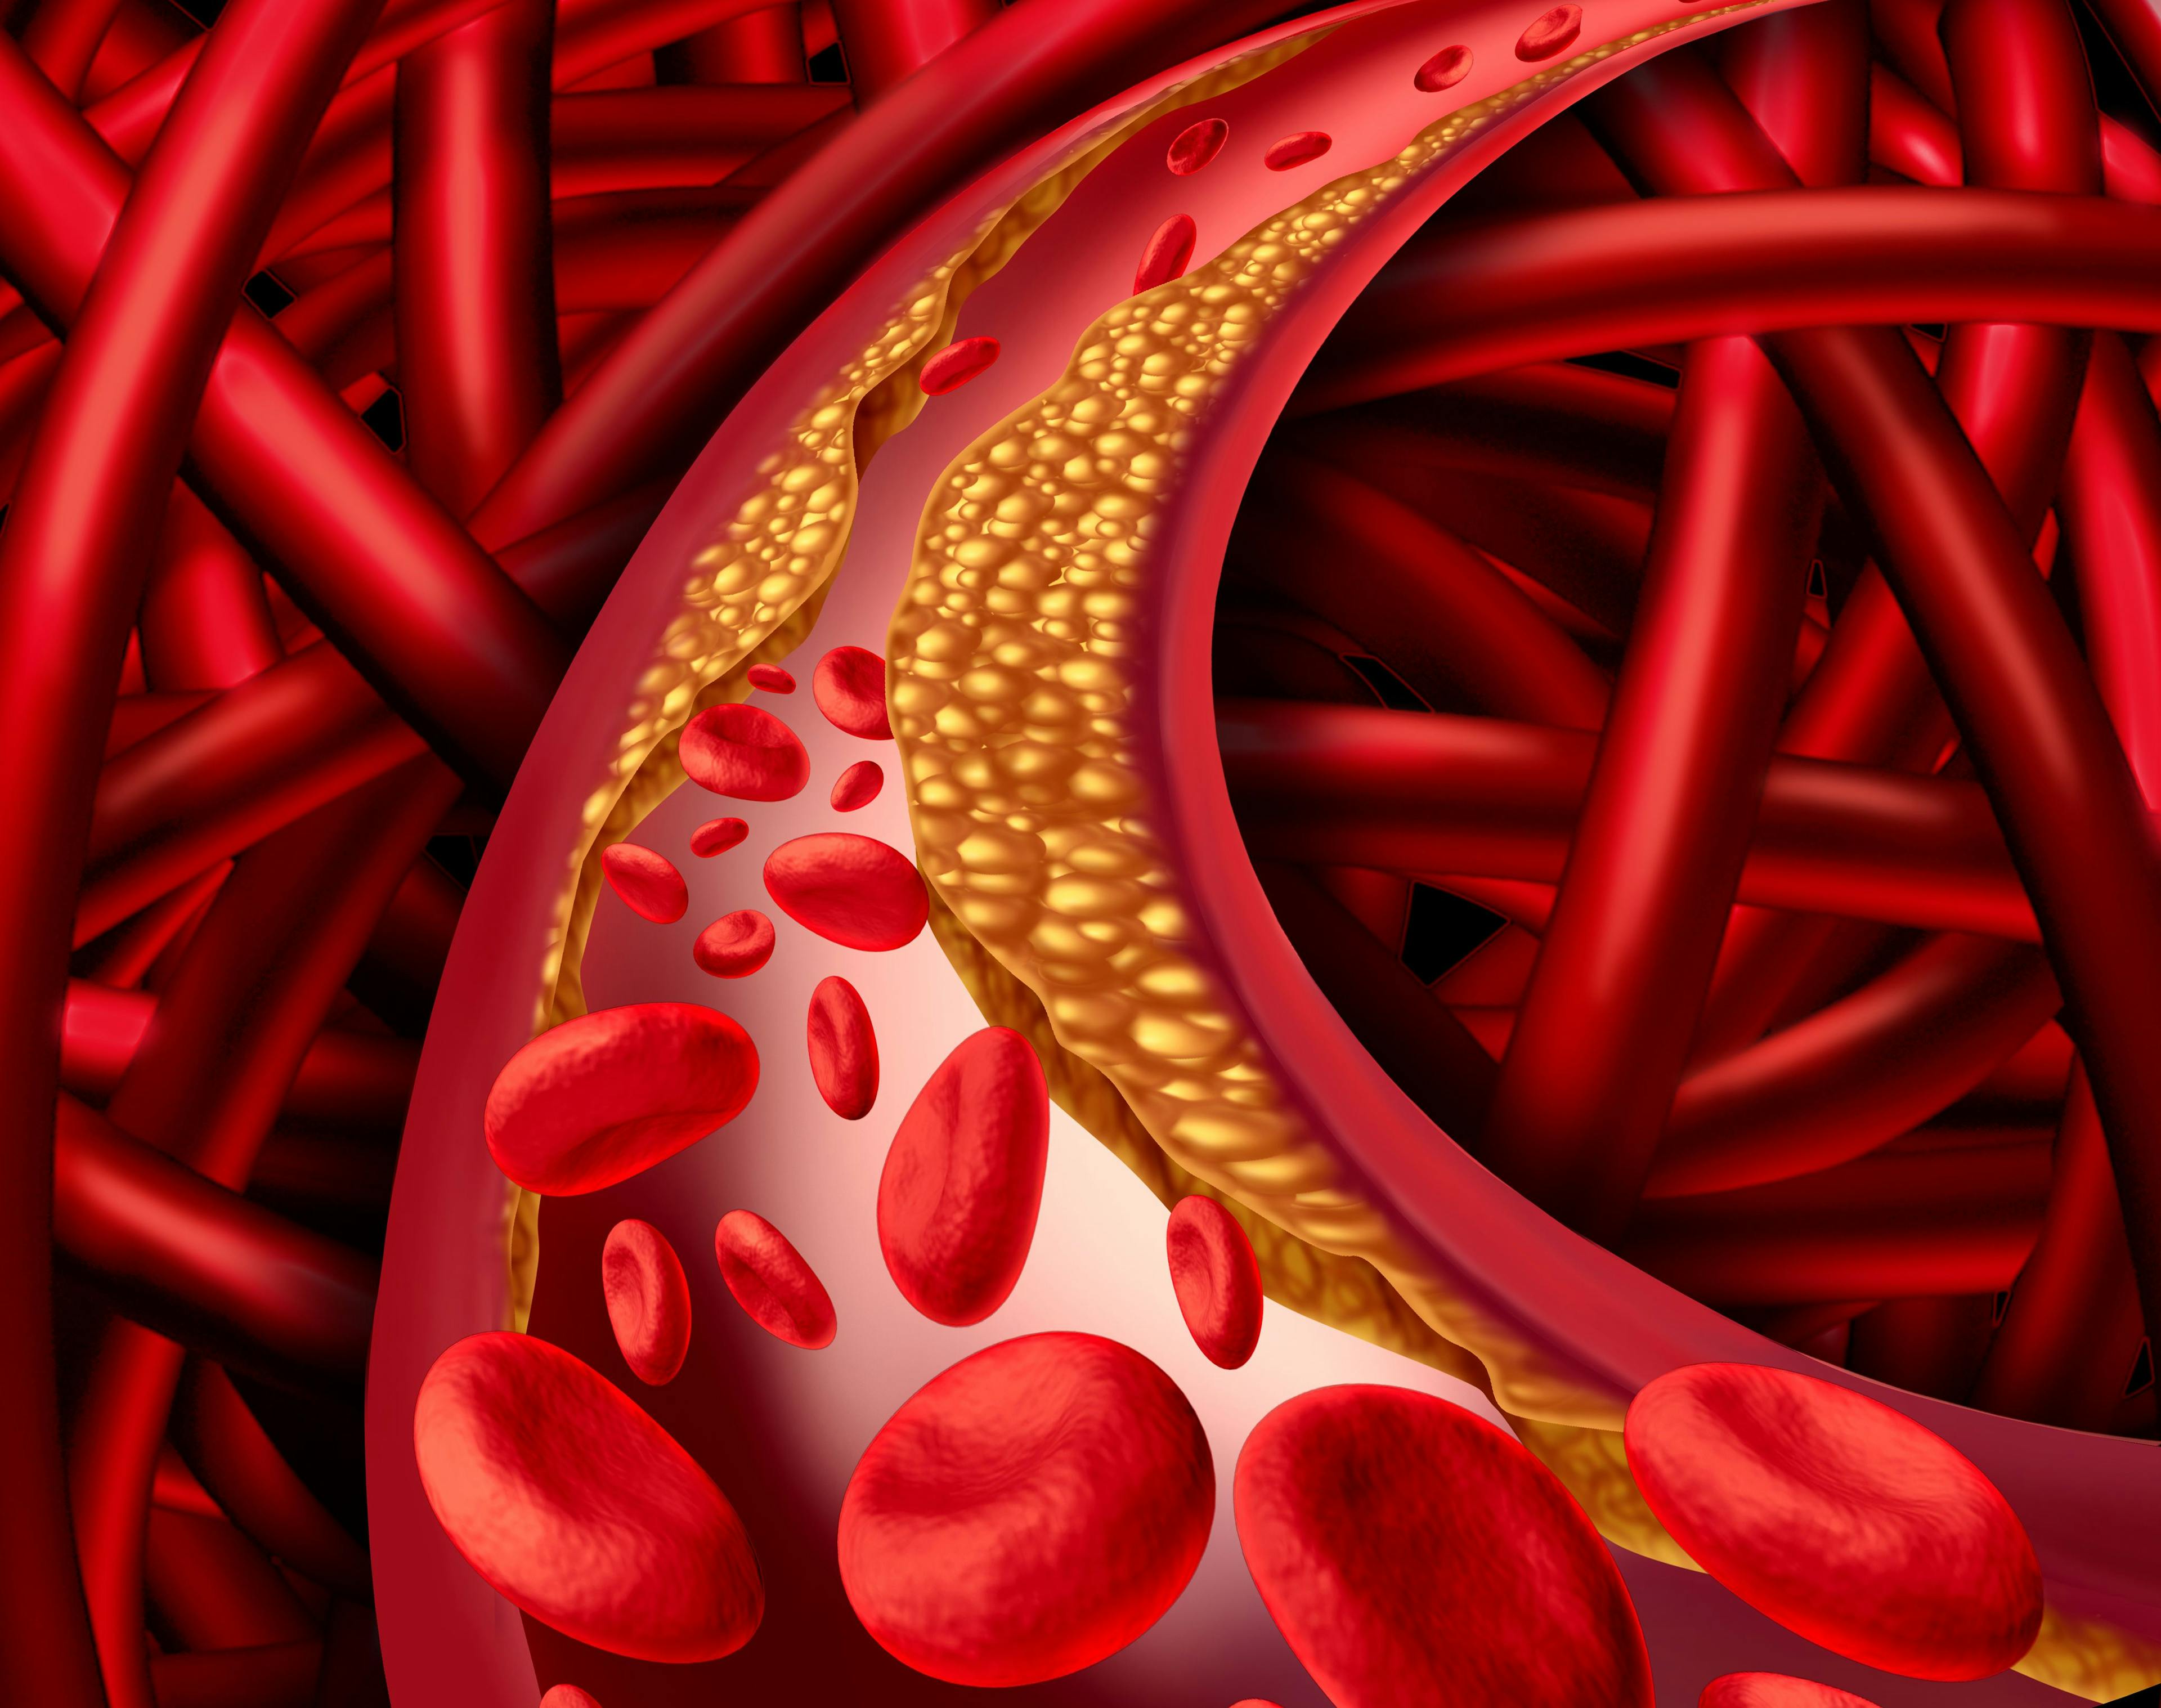 Age, Disease History Play Role in Developing Peripheral Artery Disease in Patients with Diabetes